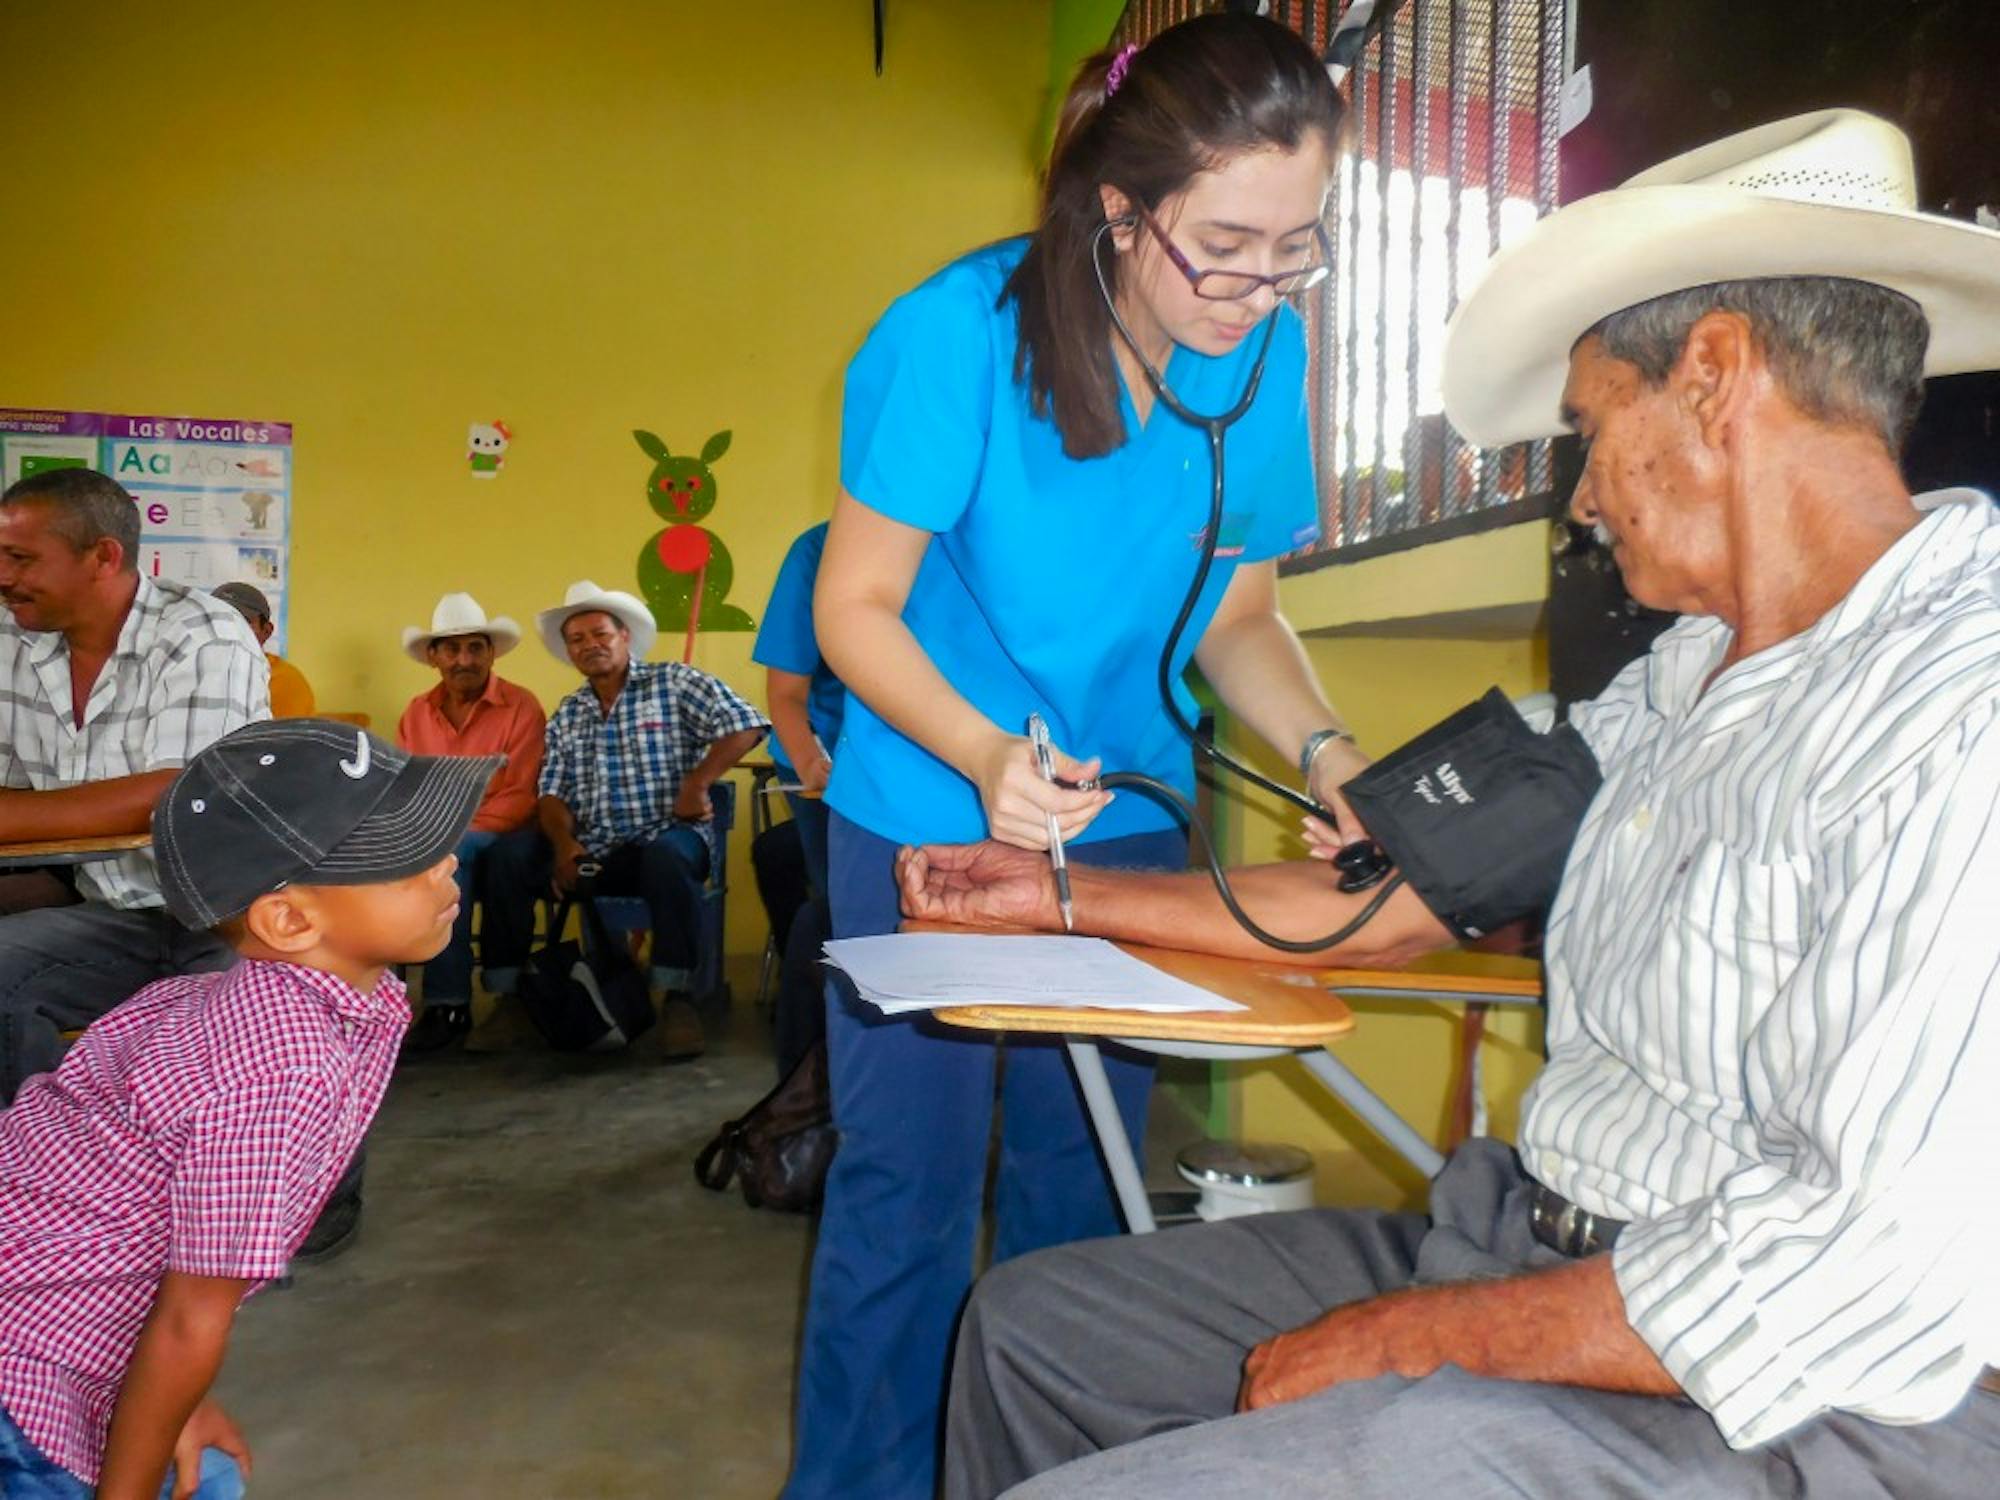 A 'Pesca' volunteer takes the blood pressure of one of the Jornada participants while his grandson watches during the May 2017 Jornada in El Rosario, Honduras.